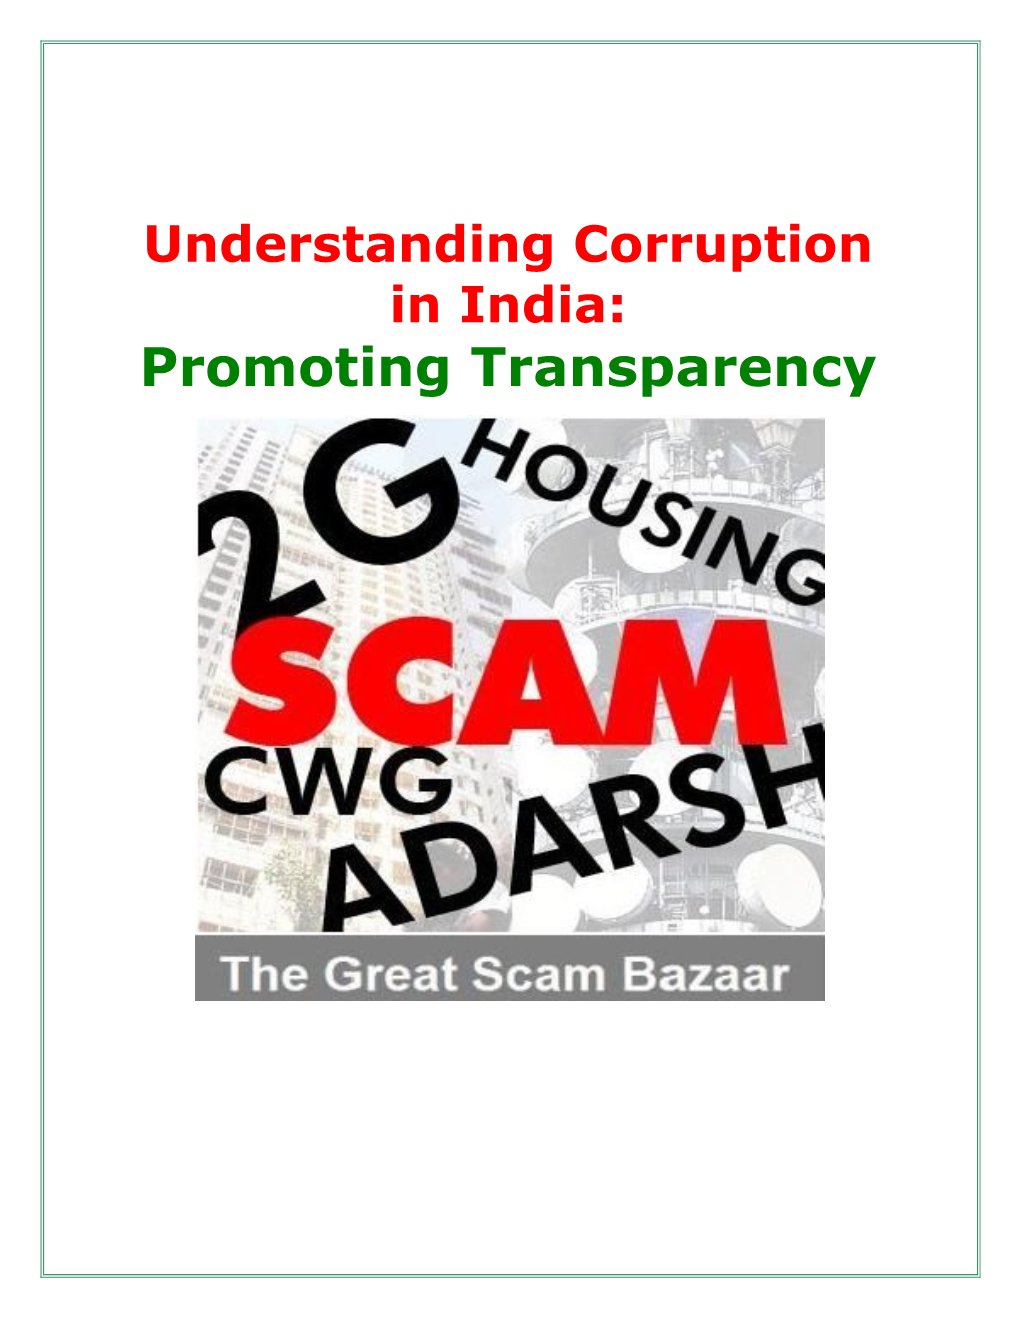 Promoting Transparency Understanding Corruption in India 2 of 2